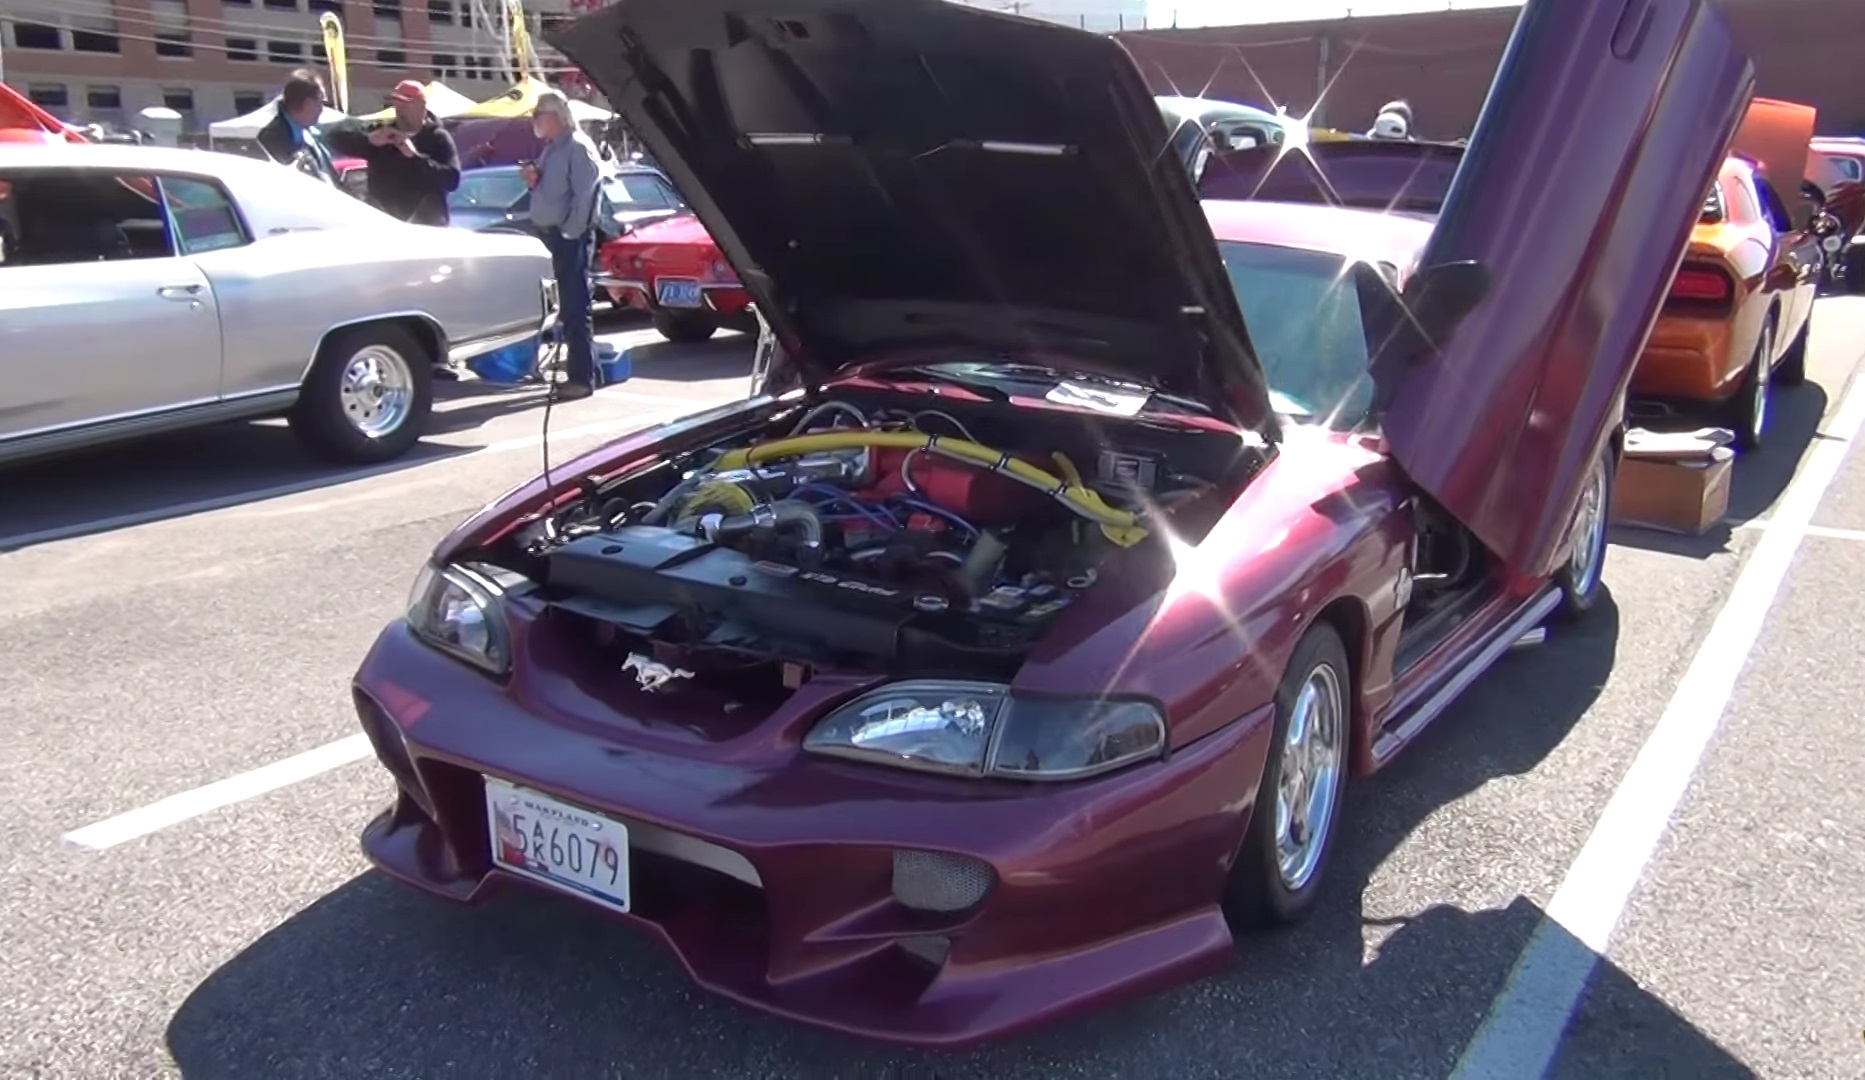 Video: Incredibly Gorgeous 1994 Ford Mustang With Lambo Doors